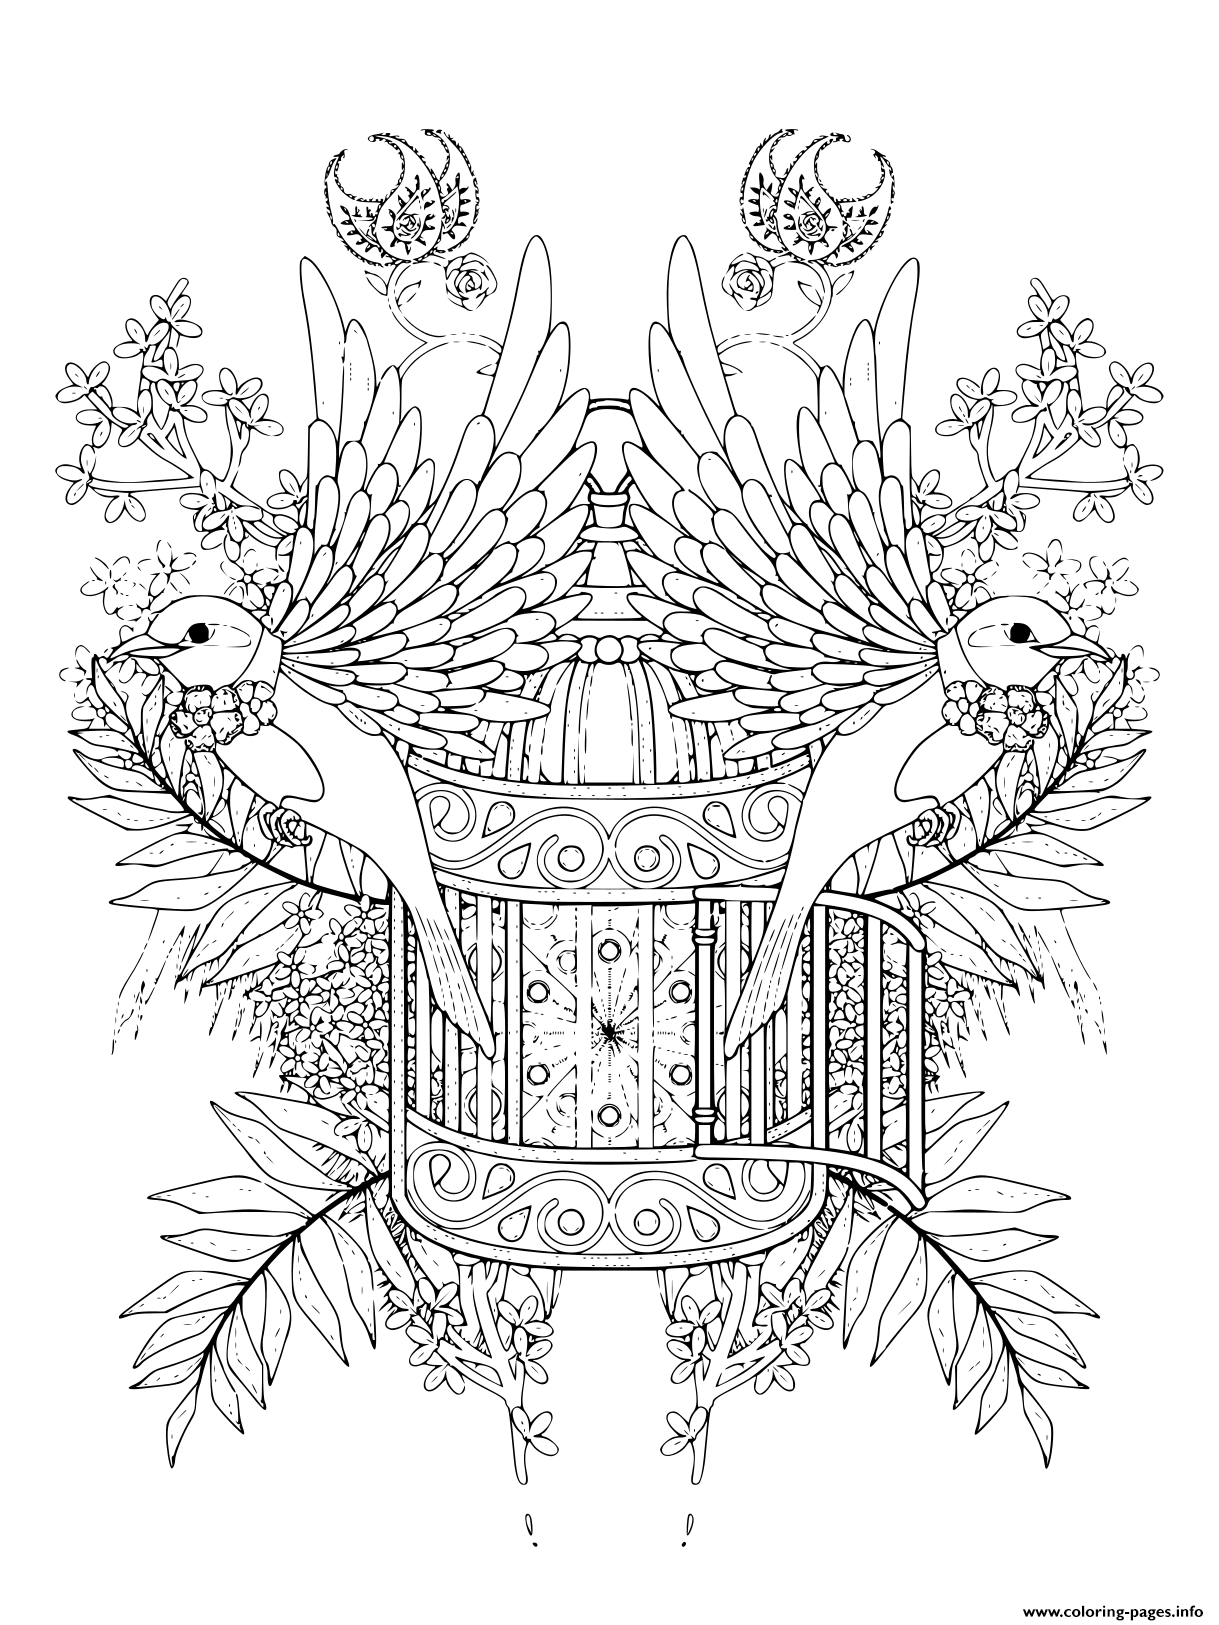 Adult Bird Blessing With Floral Elements Coloring Pages Printable